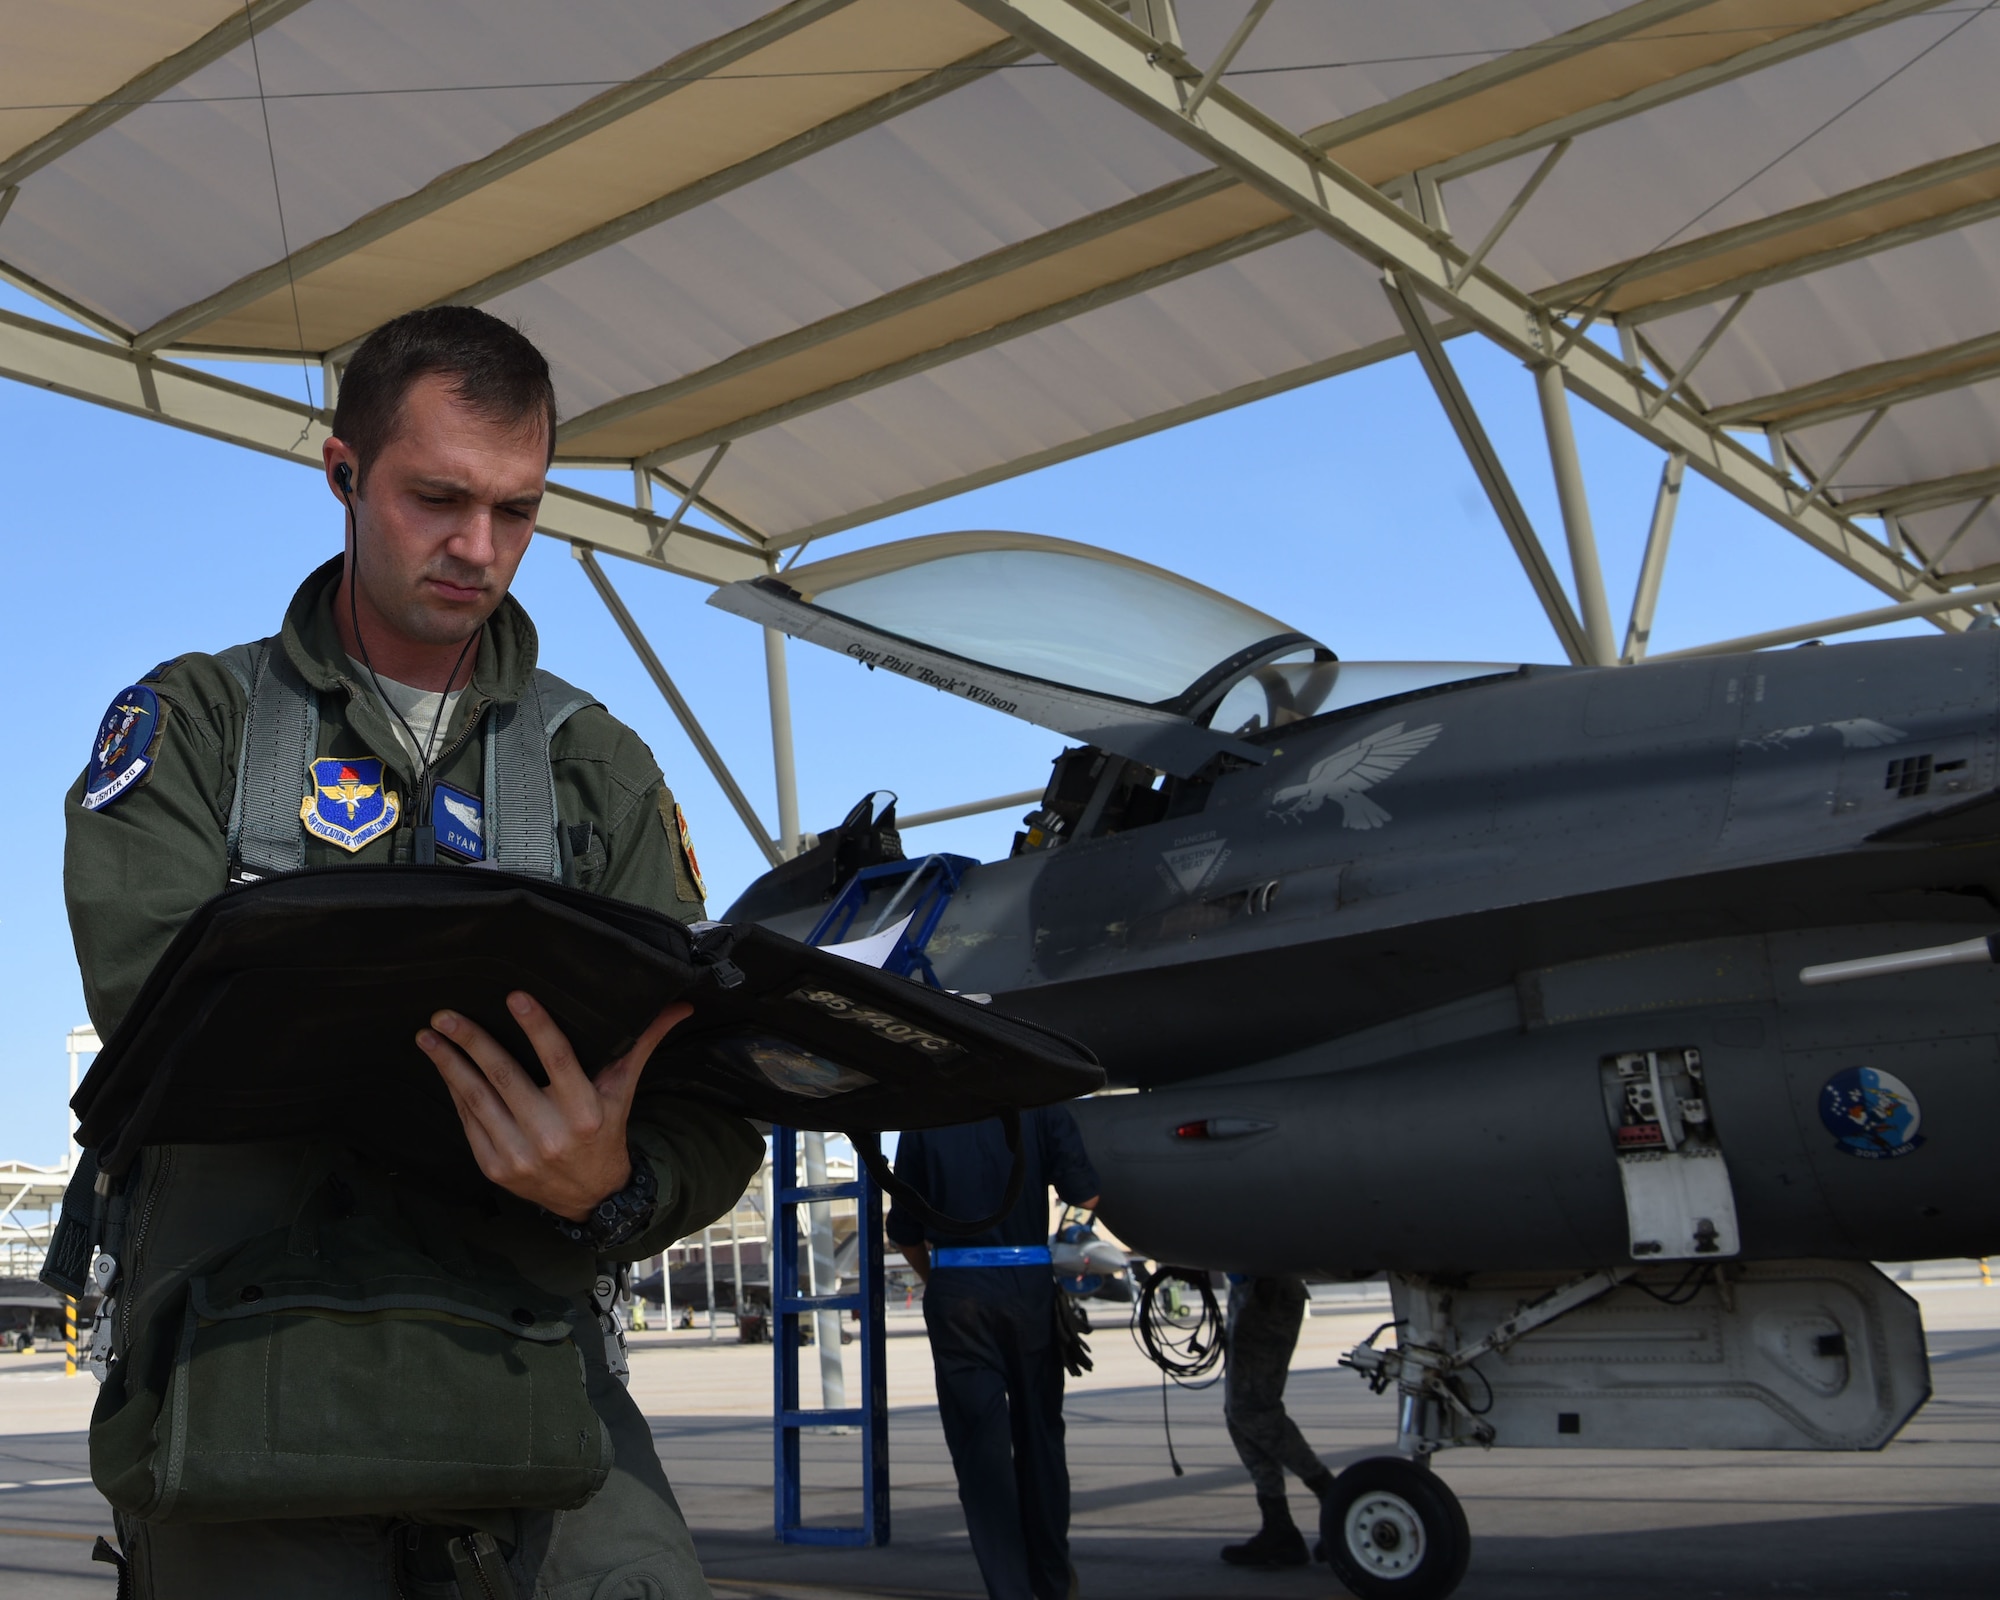 U.S. Air Force Capt. Ryan Neely, 309th Fighter Squadron B flight commander, reviews procedures before inspecting an F-16 Fighting Falcon, Aug. 14, 2018 at Luke Air Force Base, Ariz.